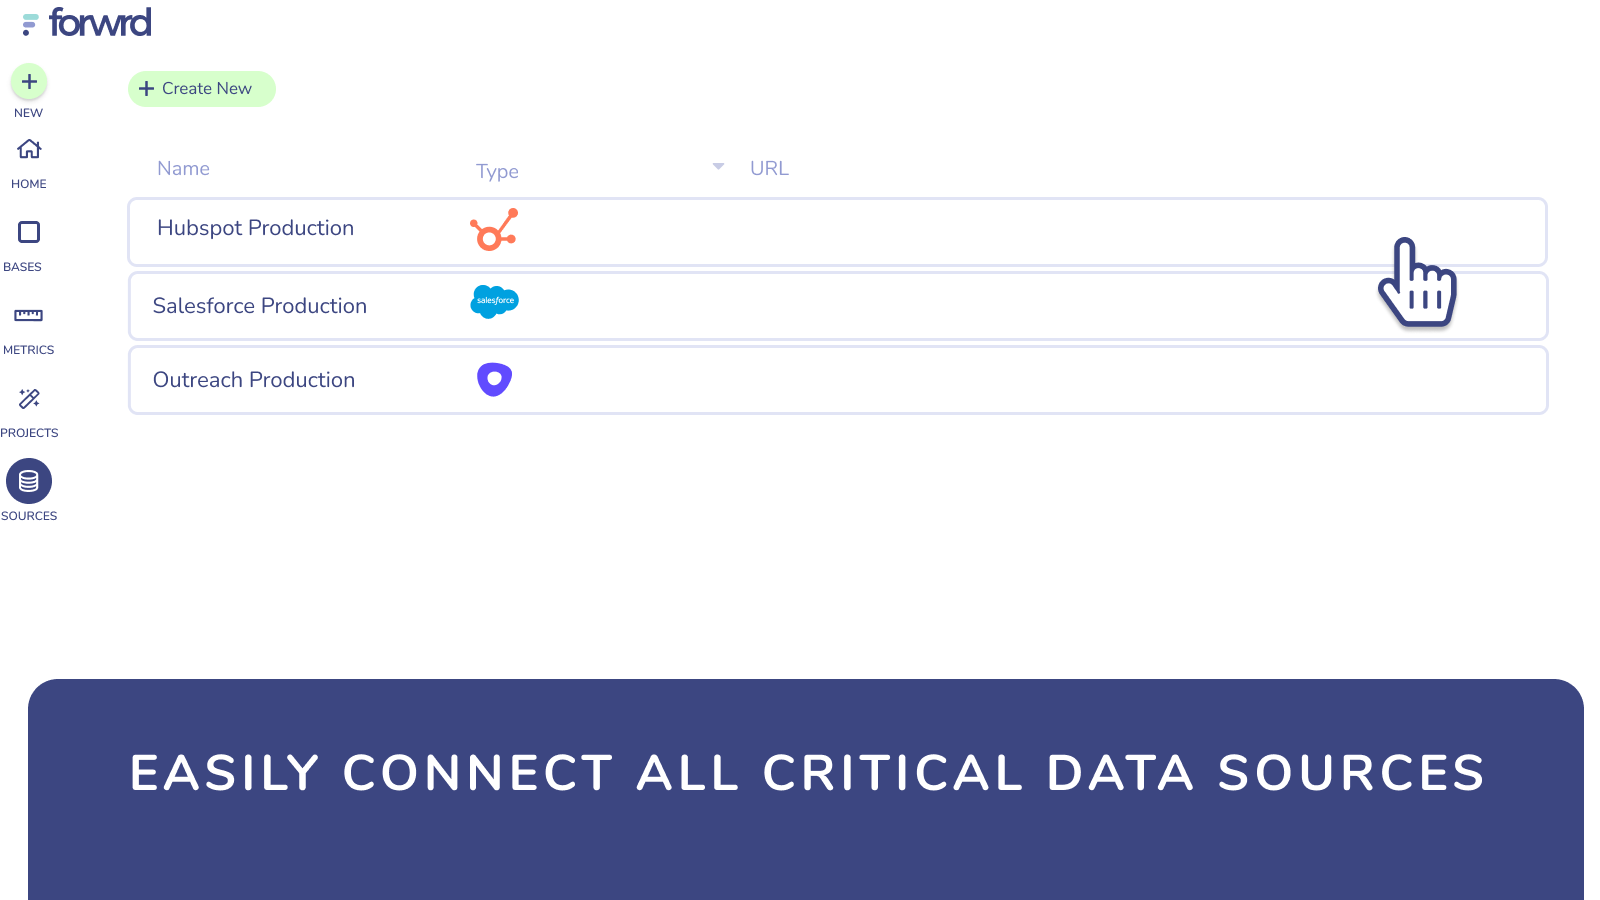 Easily connect all your cross-cloud data sources.